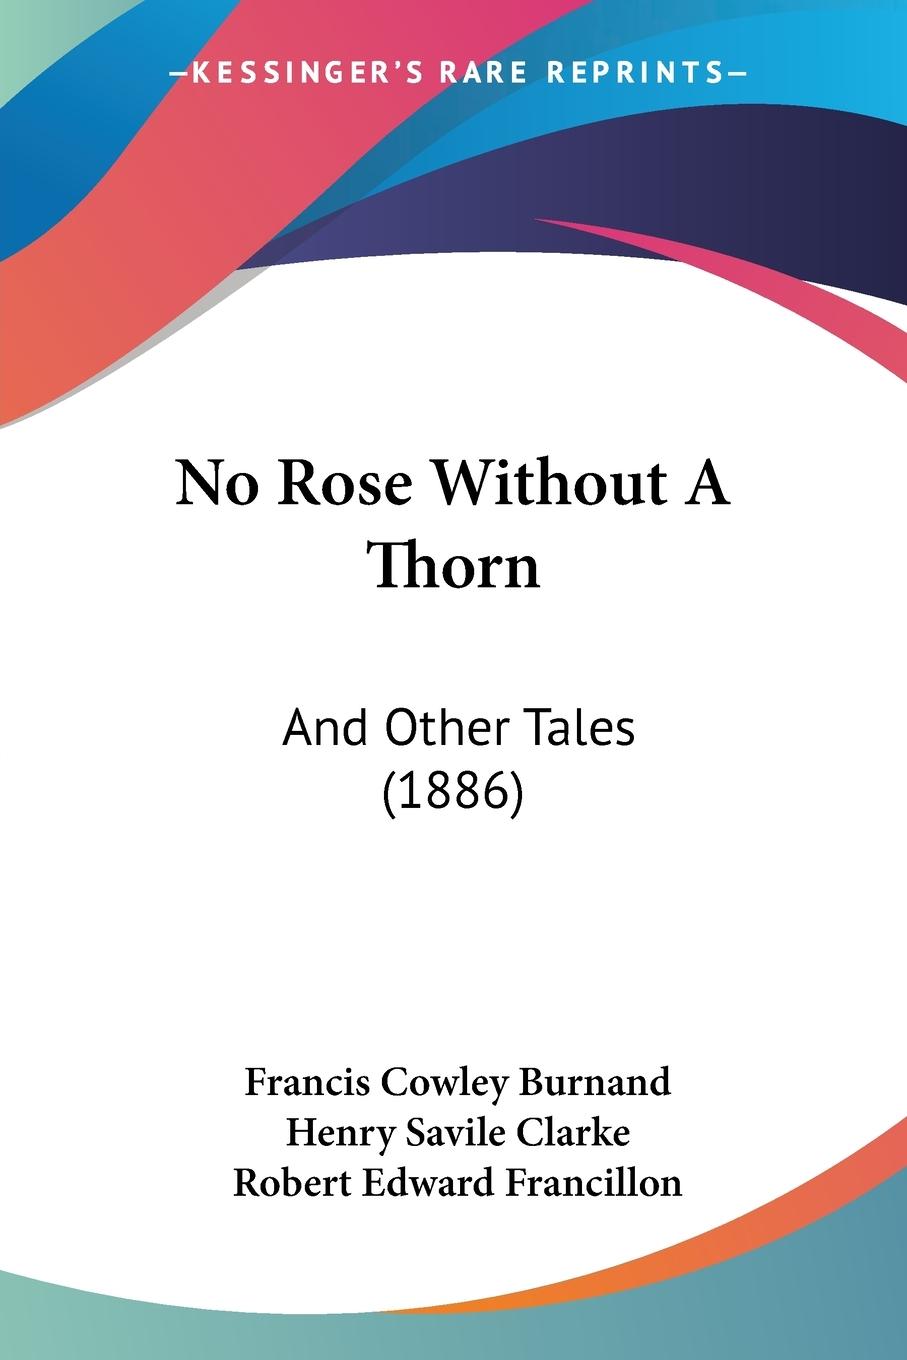 No Rose Without A Thorn - Burnand, Francis Cowley Clarke, Henry Savile Francillon, Robert Edward